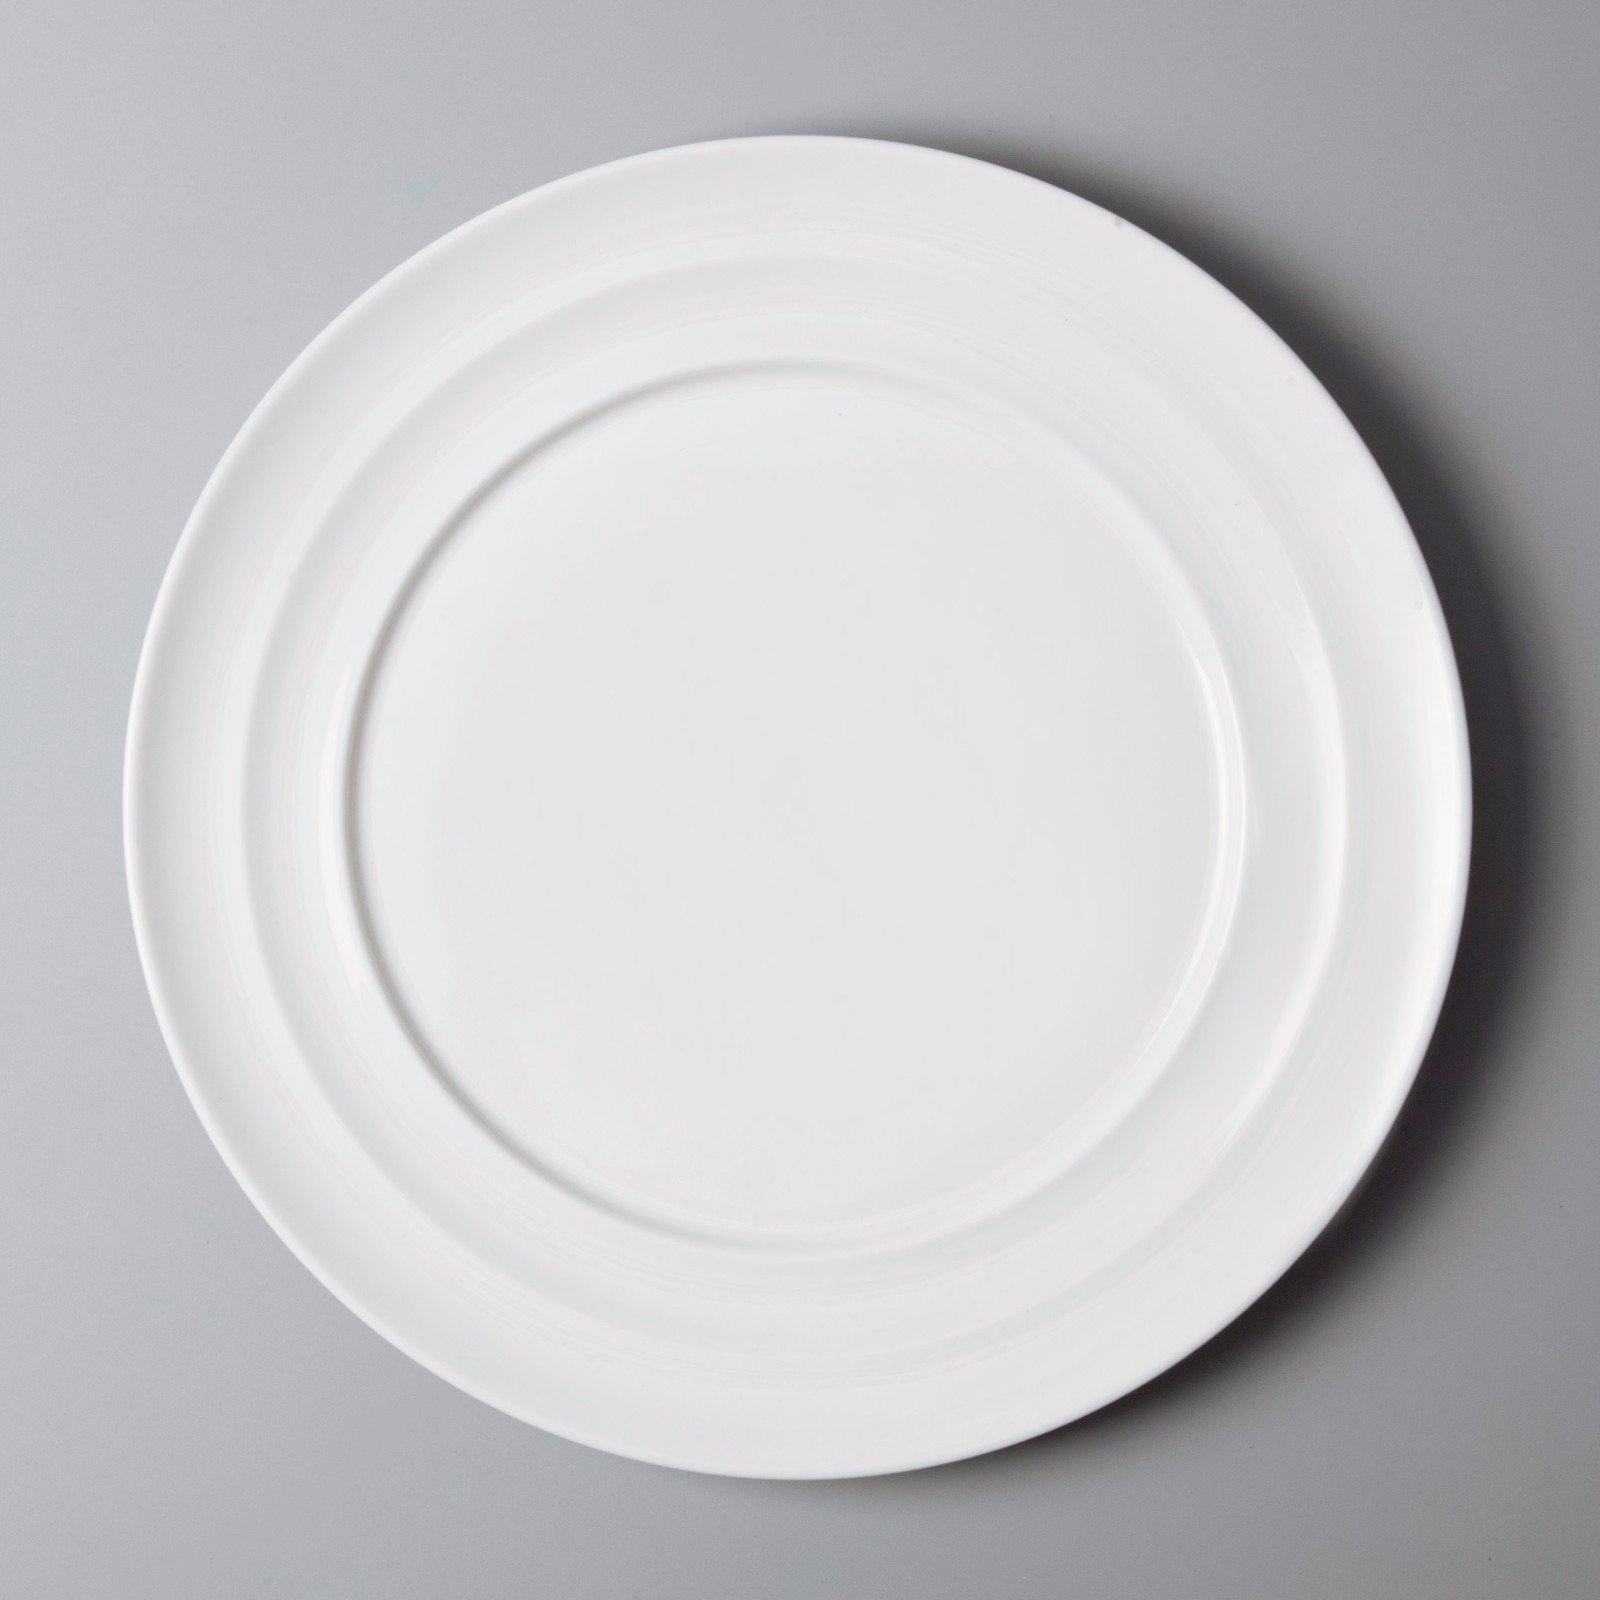 white porcelain square plates french style for kitchen Two Eight-3